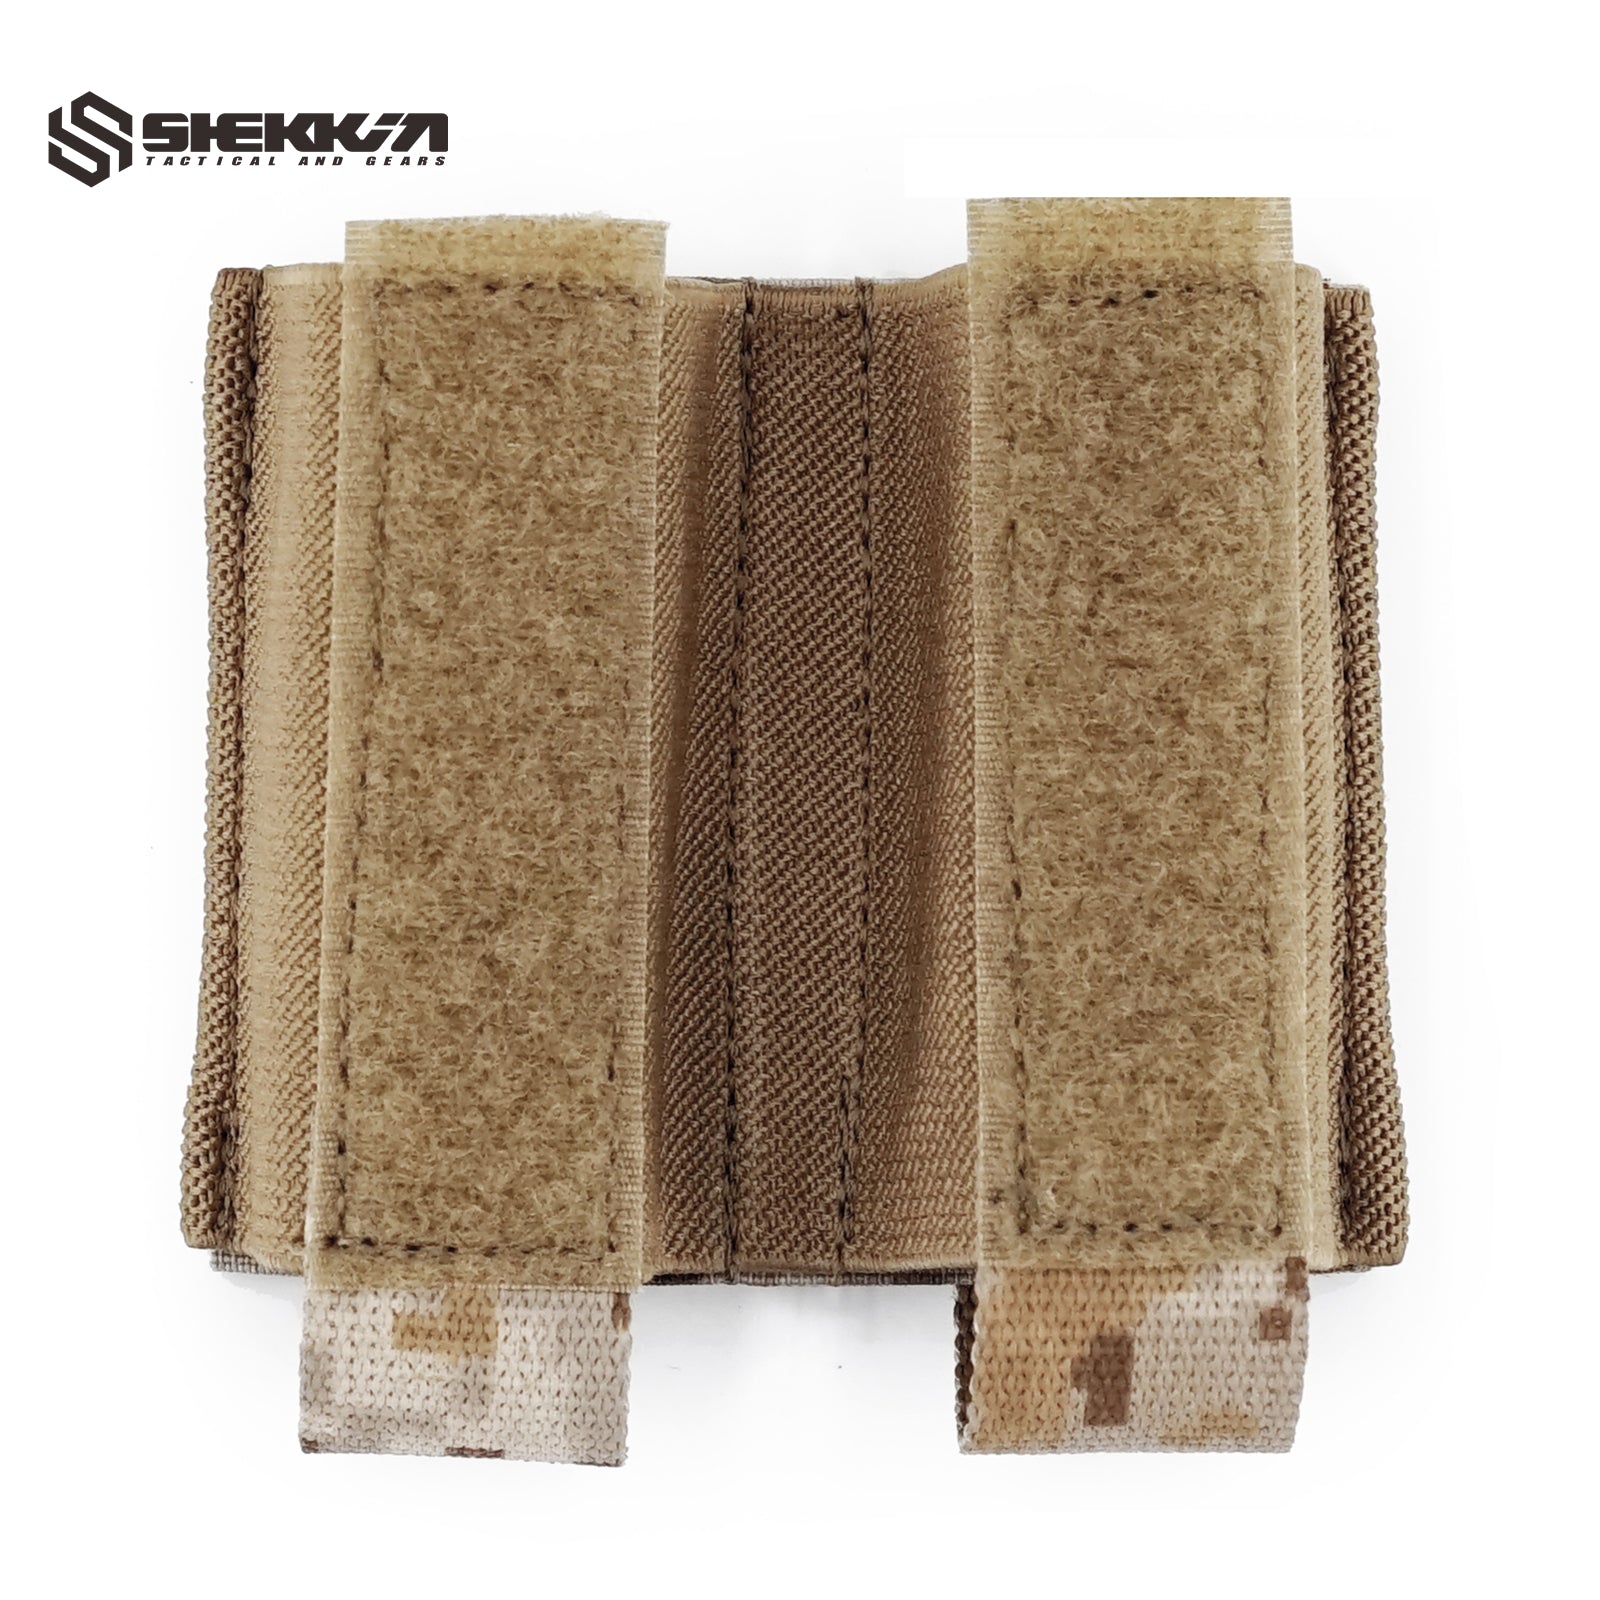 Double 9mm mag pouch for Kangaroo flap - Shekkin Gears